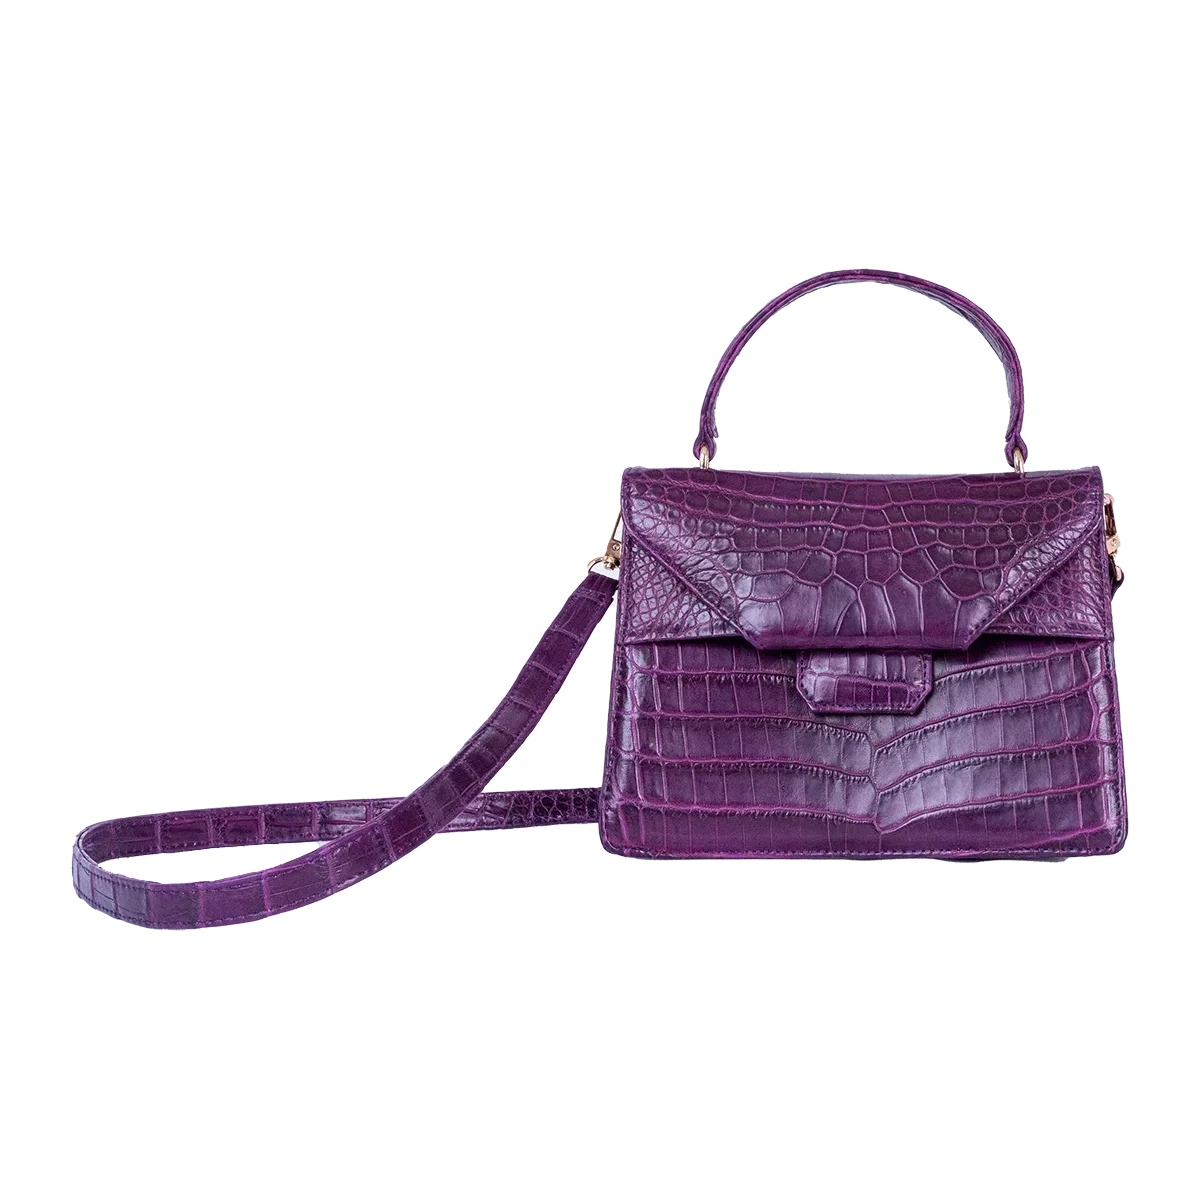 The Petite Betty An in Deep Violet Nile Crocodile - Norton and Hodges